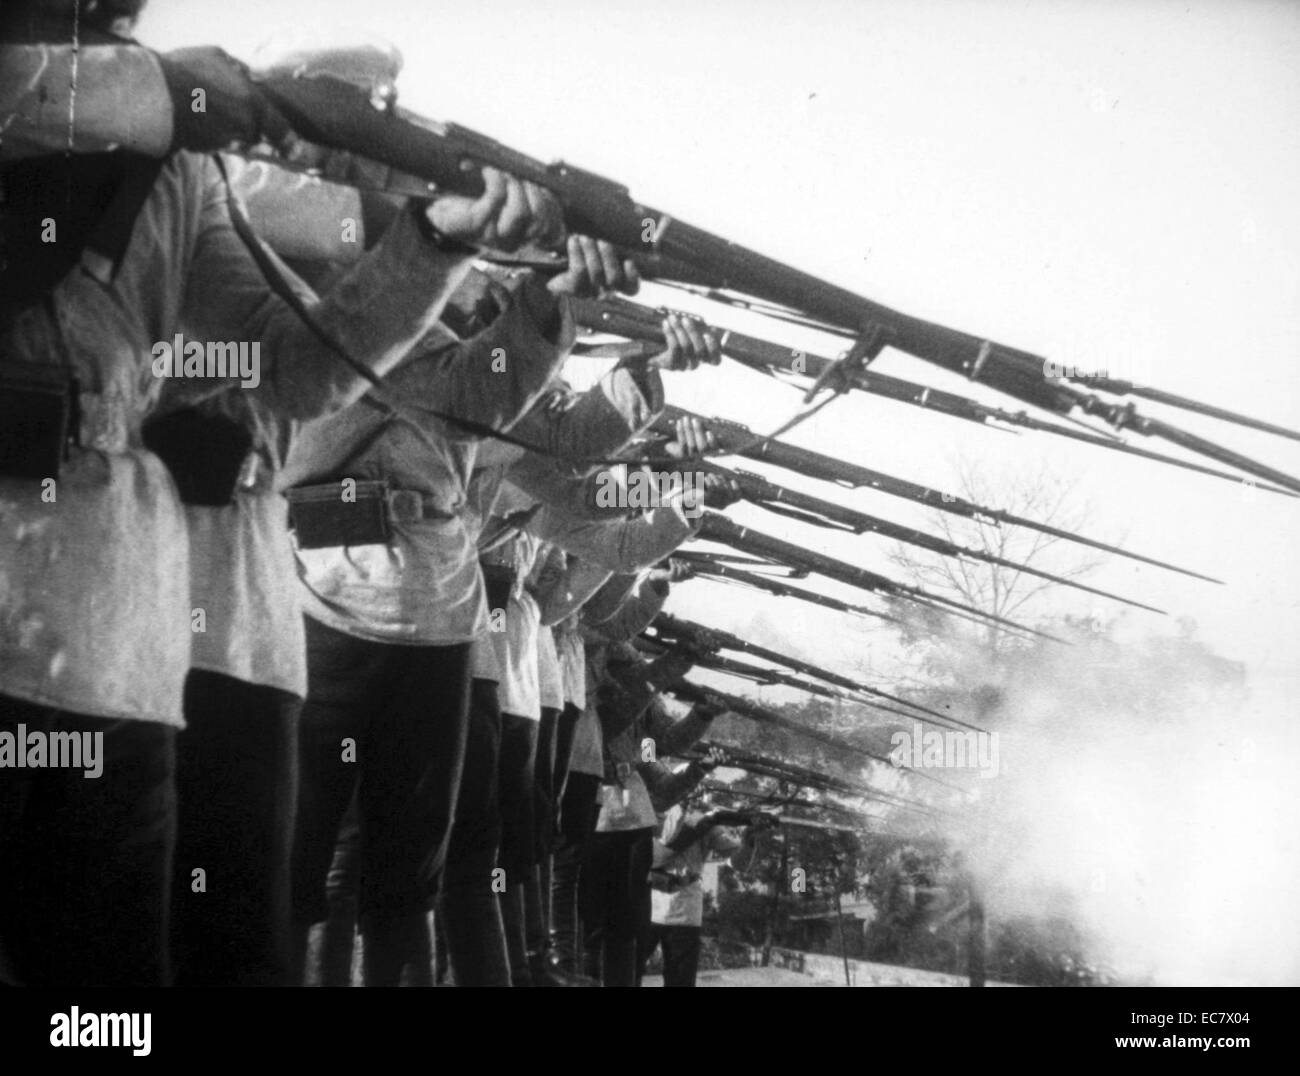 Battleship Potemkin, is a 1925 silent film directed by Sergei Eisenstein. It presents a dramatized version of the mutiny that occurred in 1905 when the crew of the Russian battleship Potemkin rebelled against their officers of the Tsarist regime Stock Photo